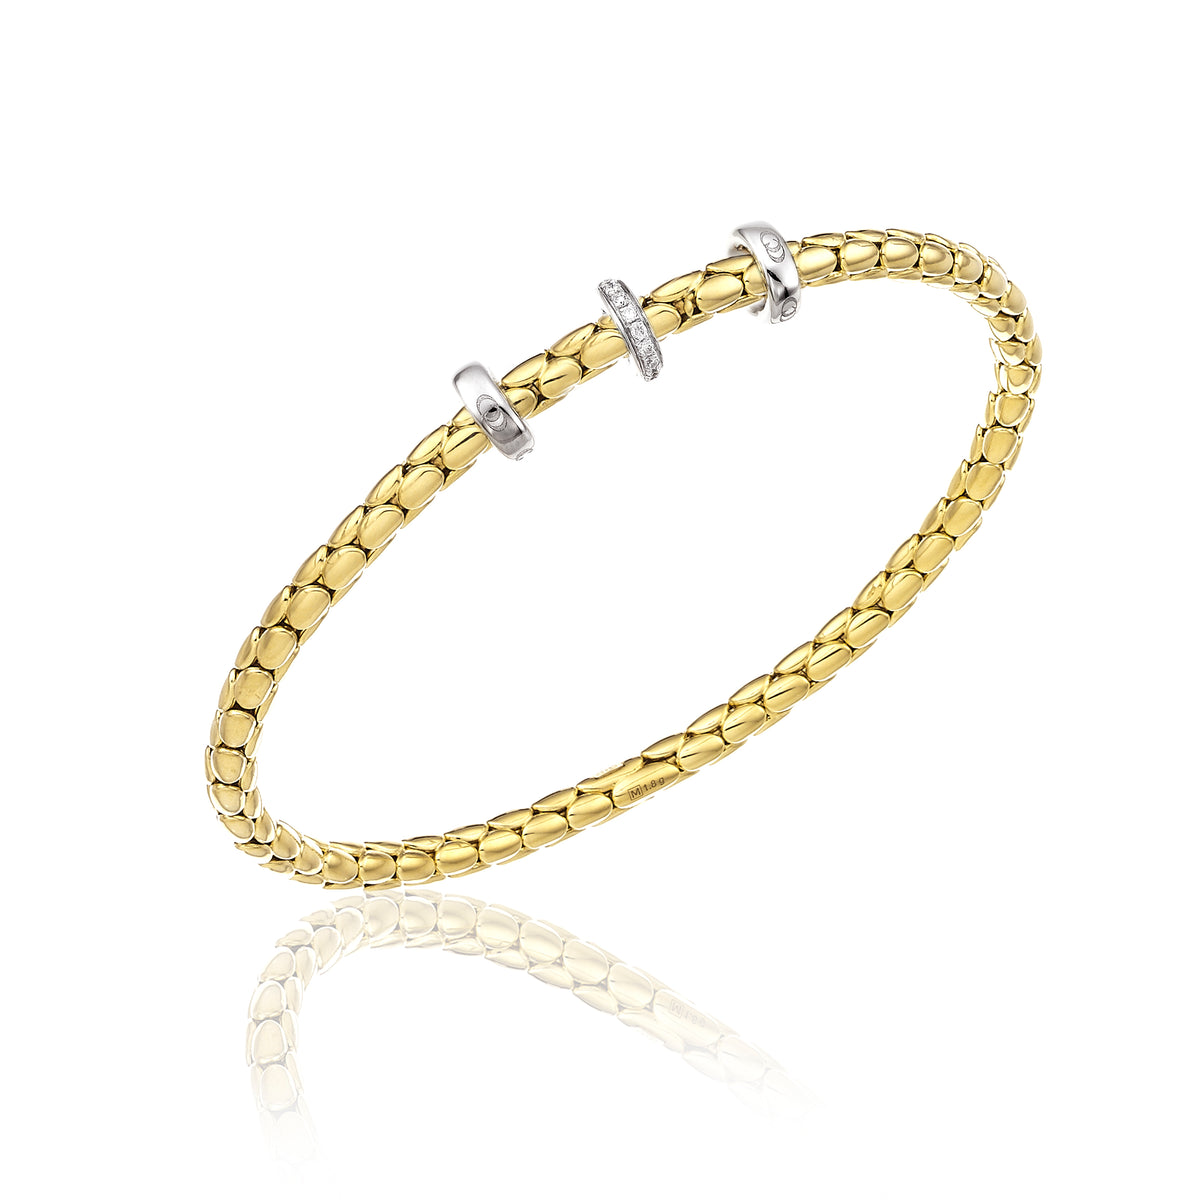 Chimento Stretch Spring Bracelet (Small, 3 Disc) in 18k Yellow and White Gold with White Diamonds - Orsini Jewellers